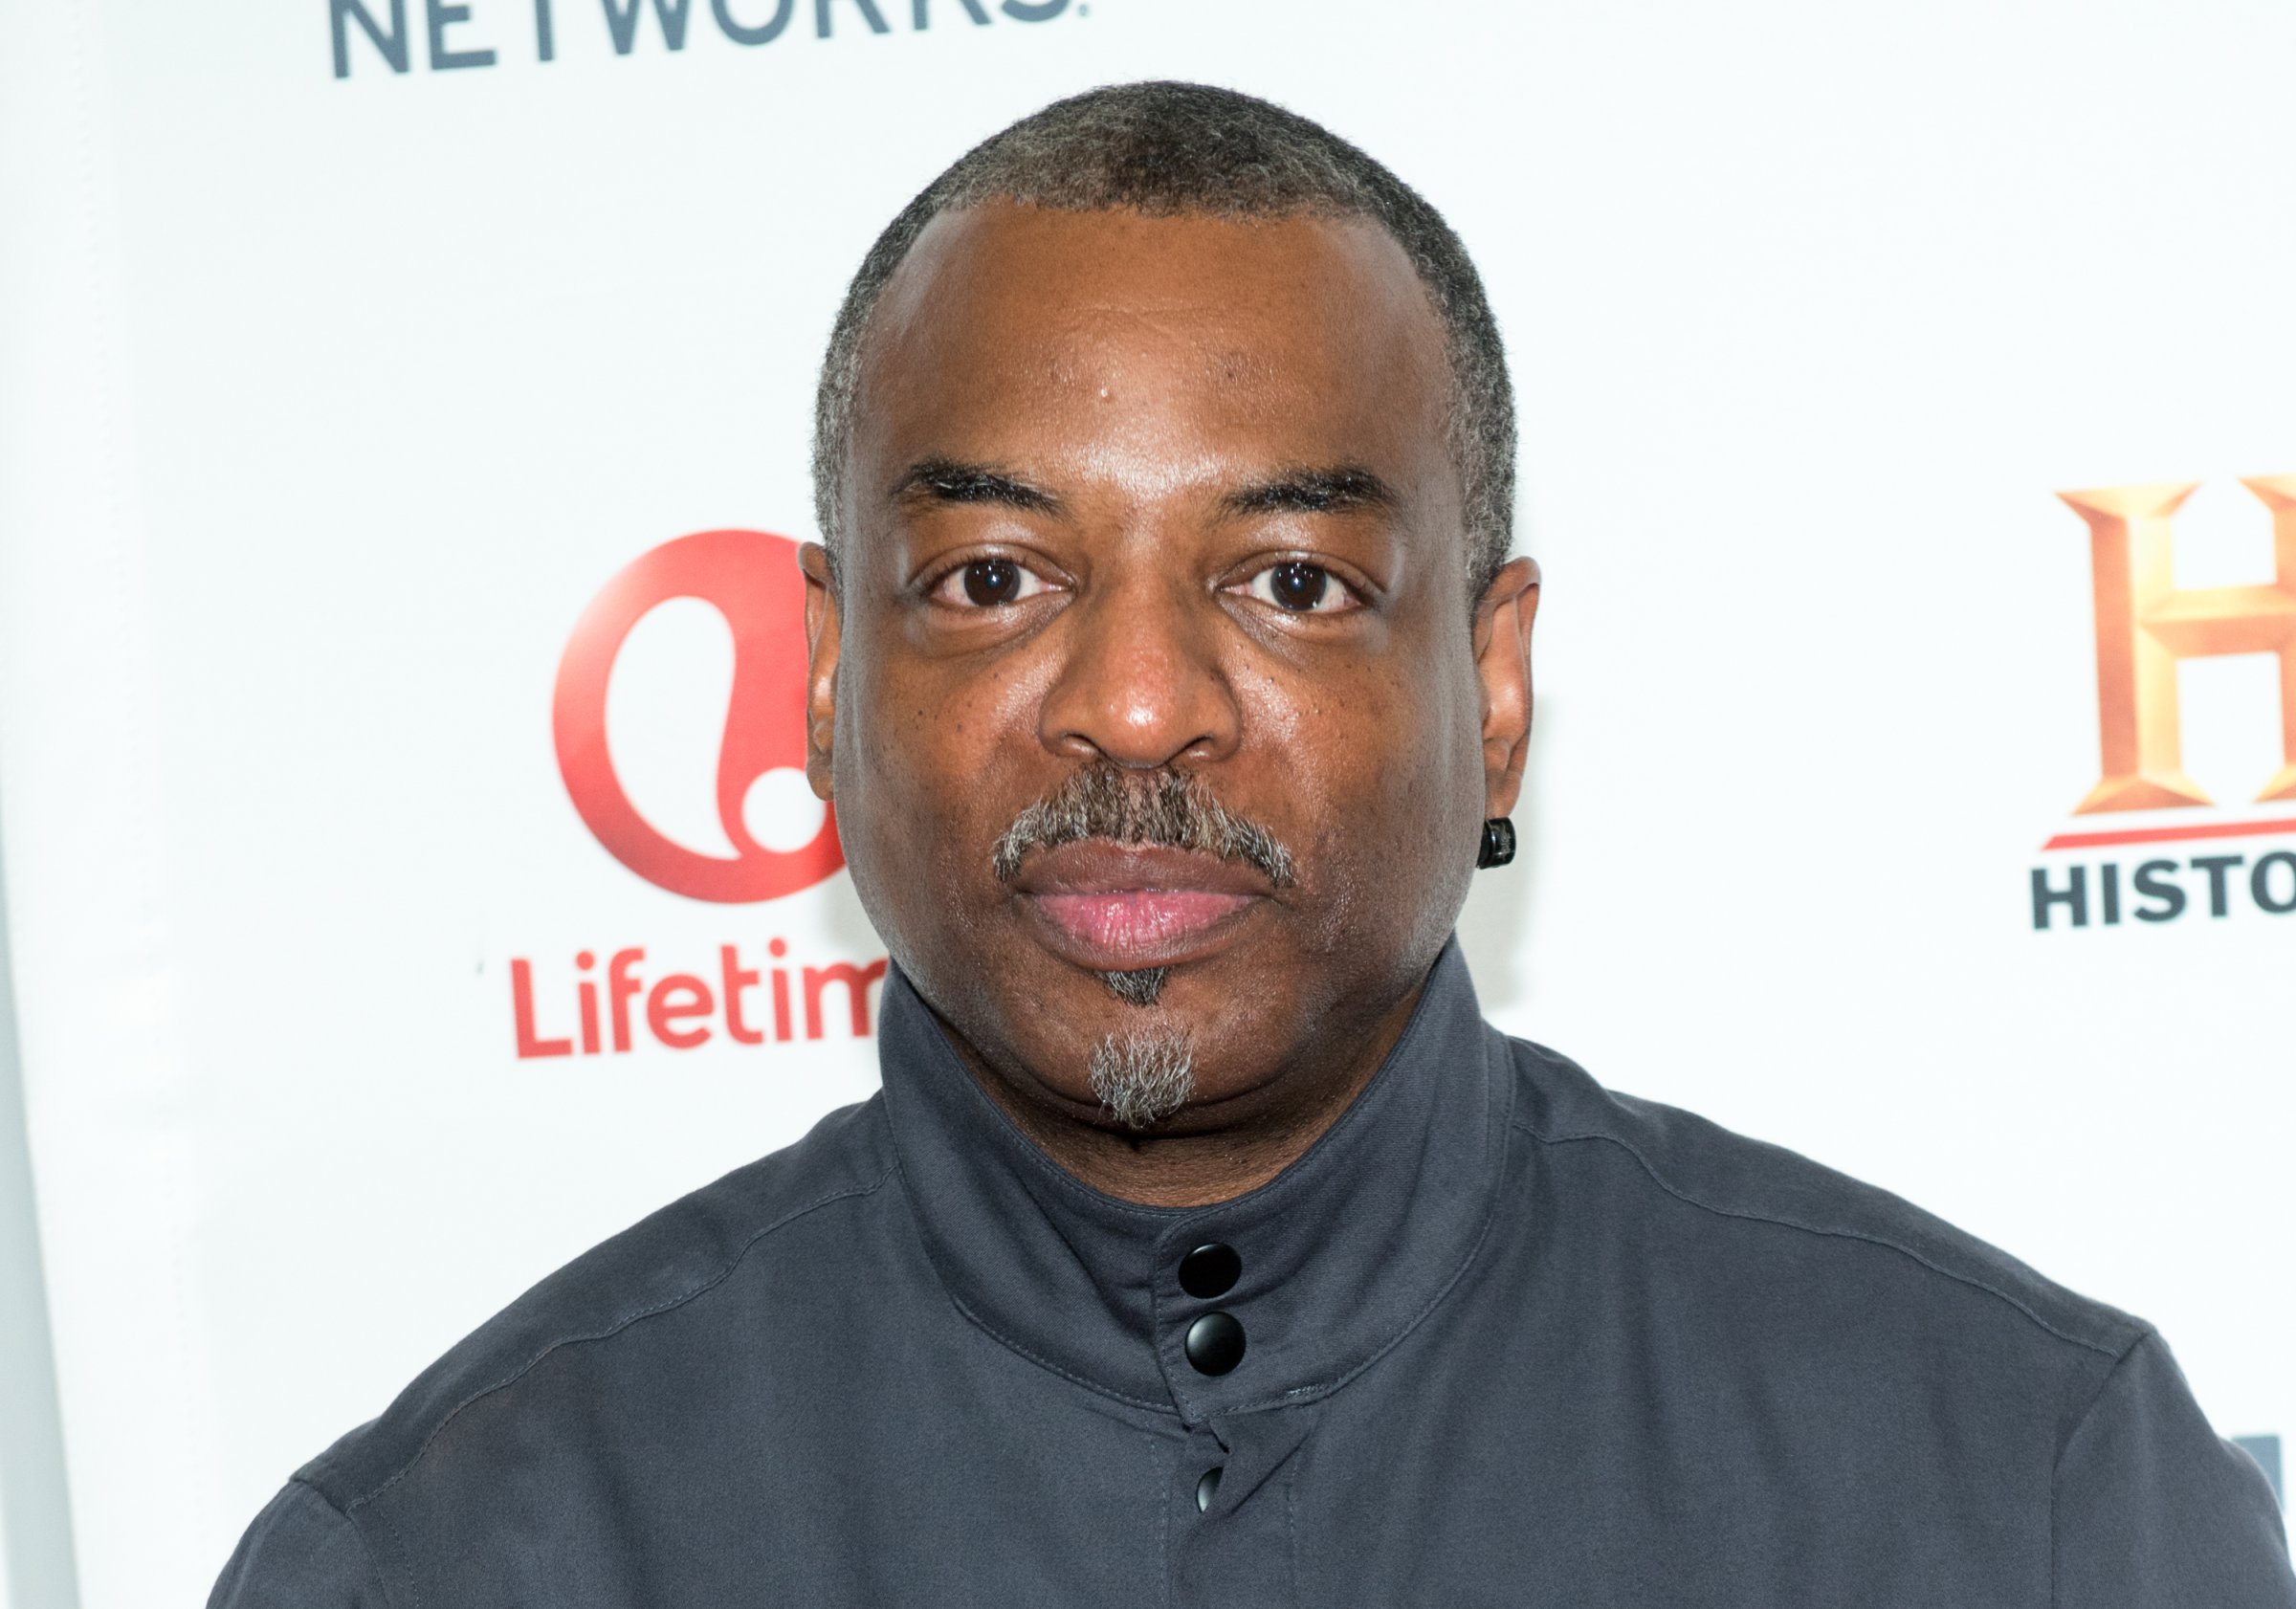 Actor LeVar Burton attends the 2015 A+E Network Upfront at Park Avenue Armory on April 30, 2015 in New York City.